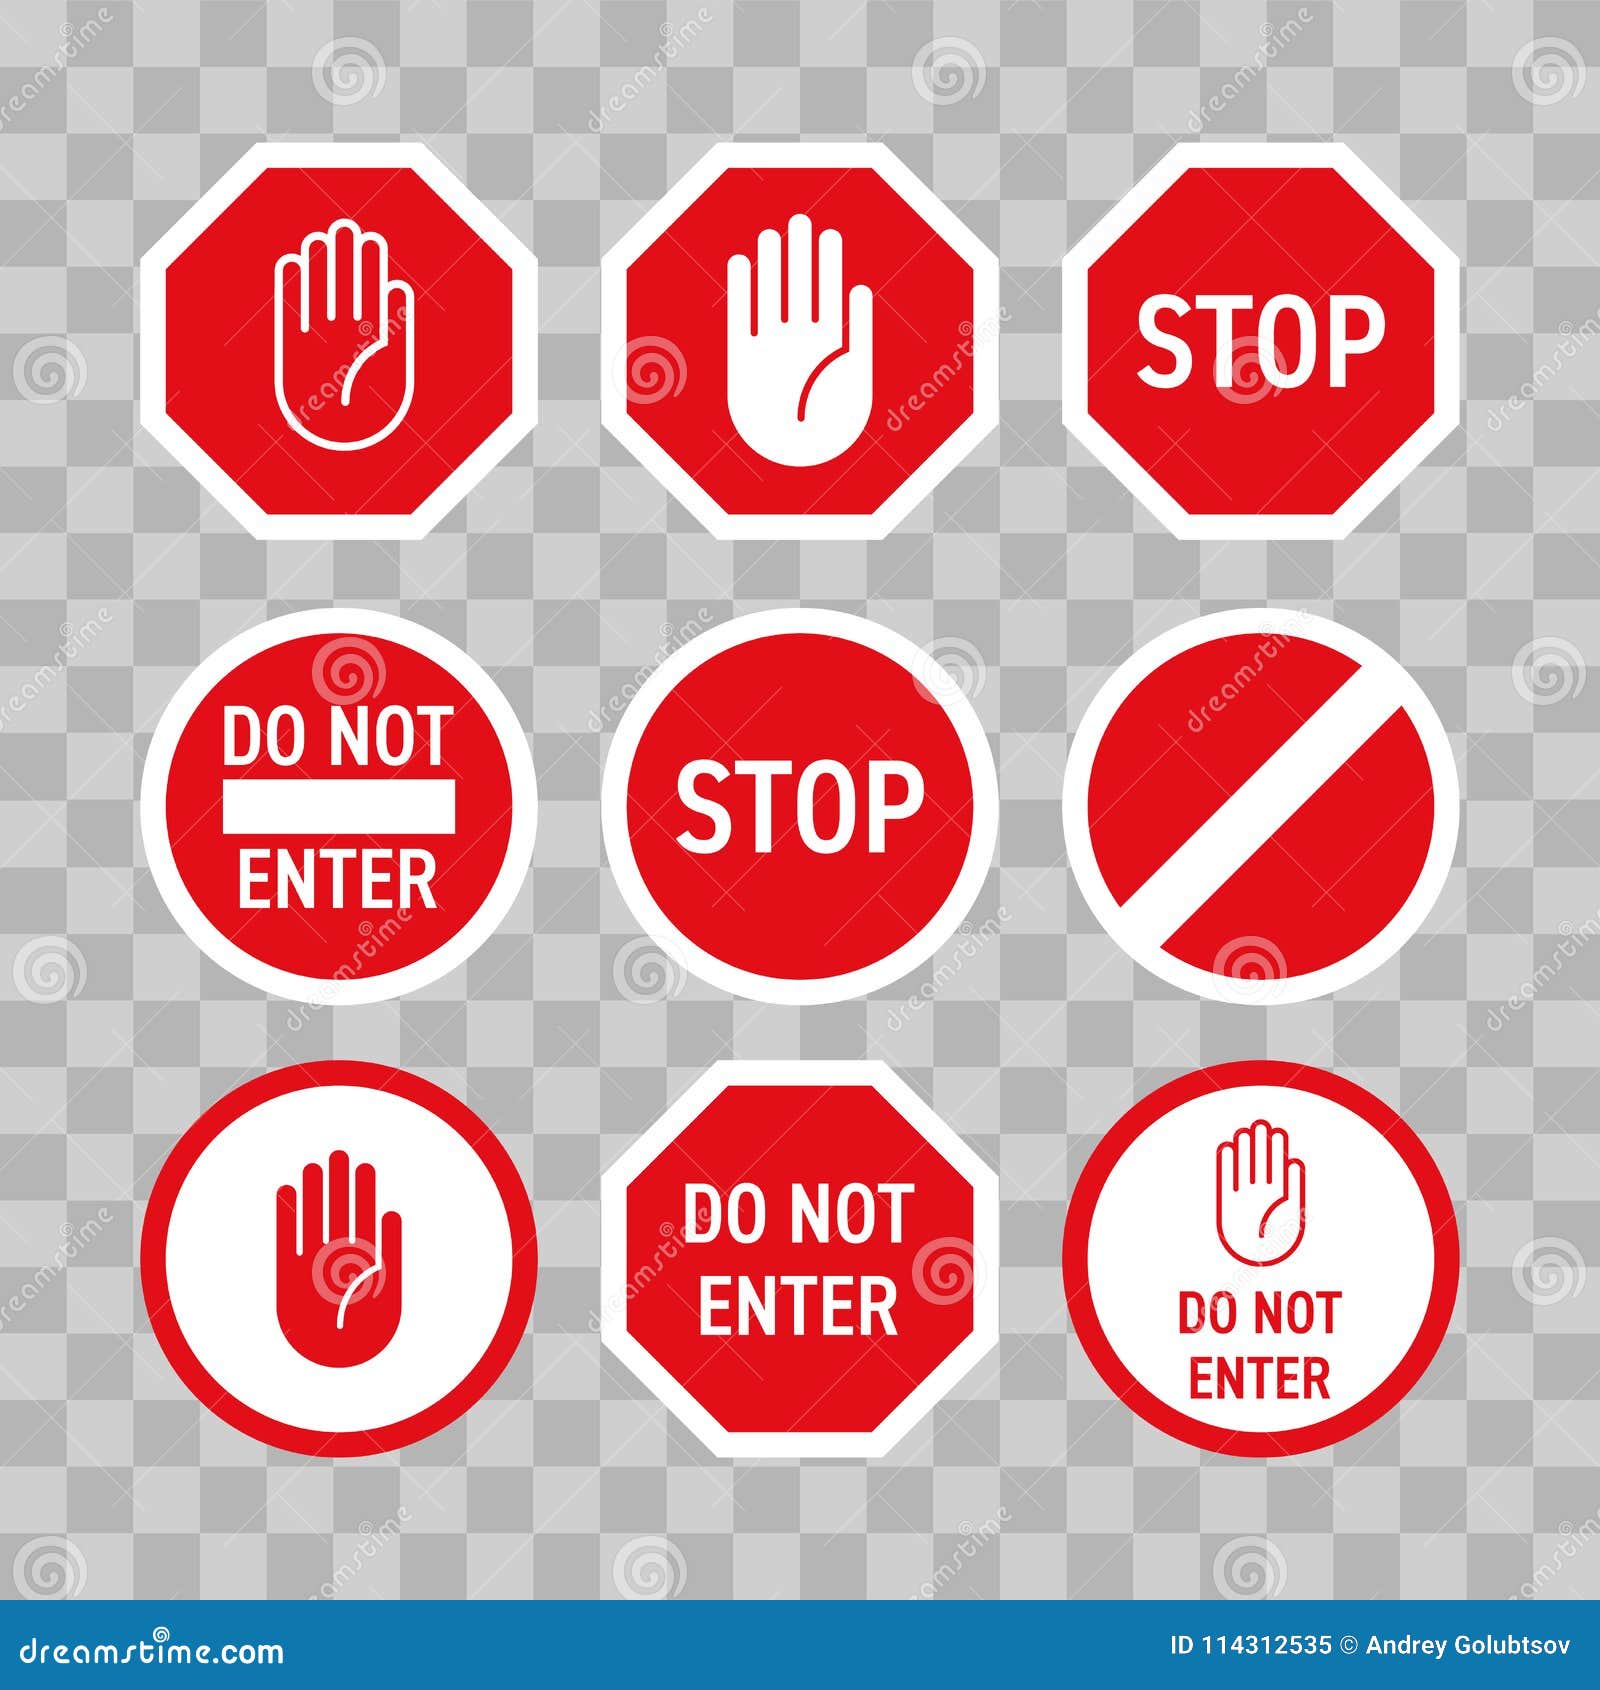 Stop Road Sign With Hand Gesture Vector Red Do Not Enter Traffic Sign Caution Ban Symbol Direction Sign Warning Stop Signs Stock Vector Illustration Of Caution Gesture